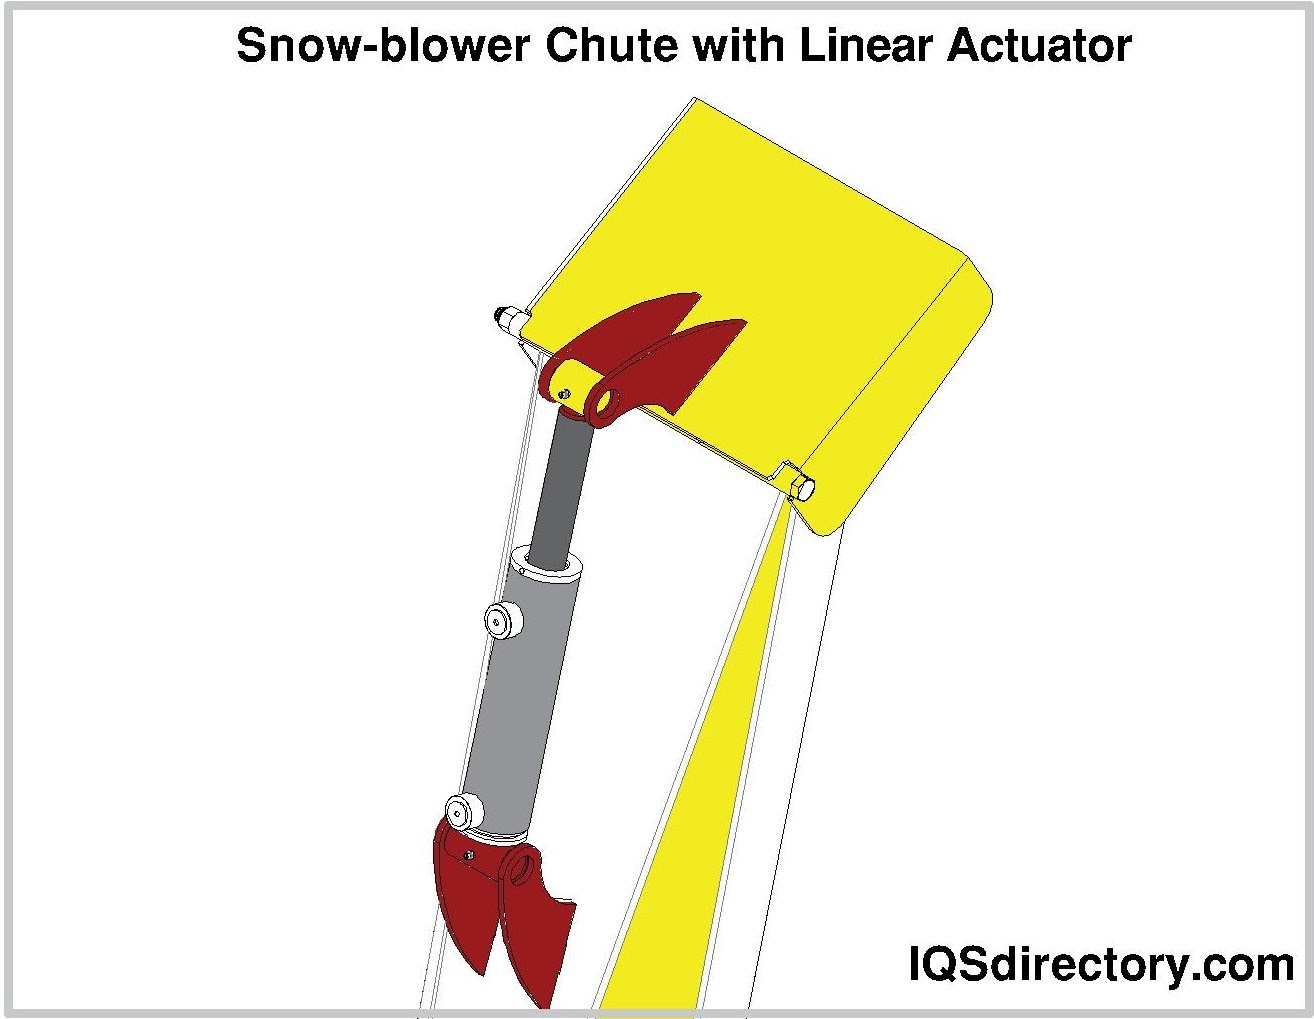 Snowblower Chute with Linear Actuator